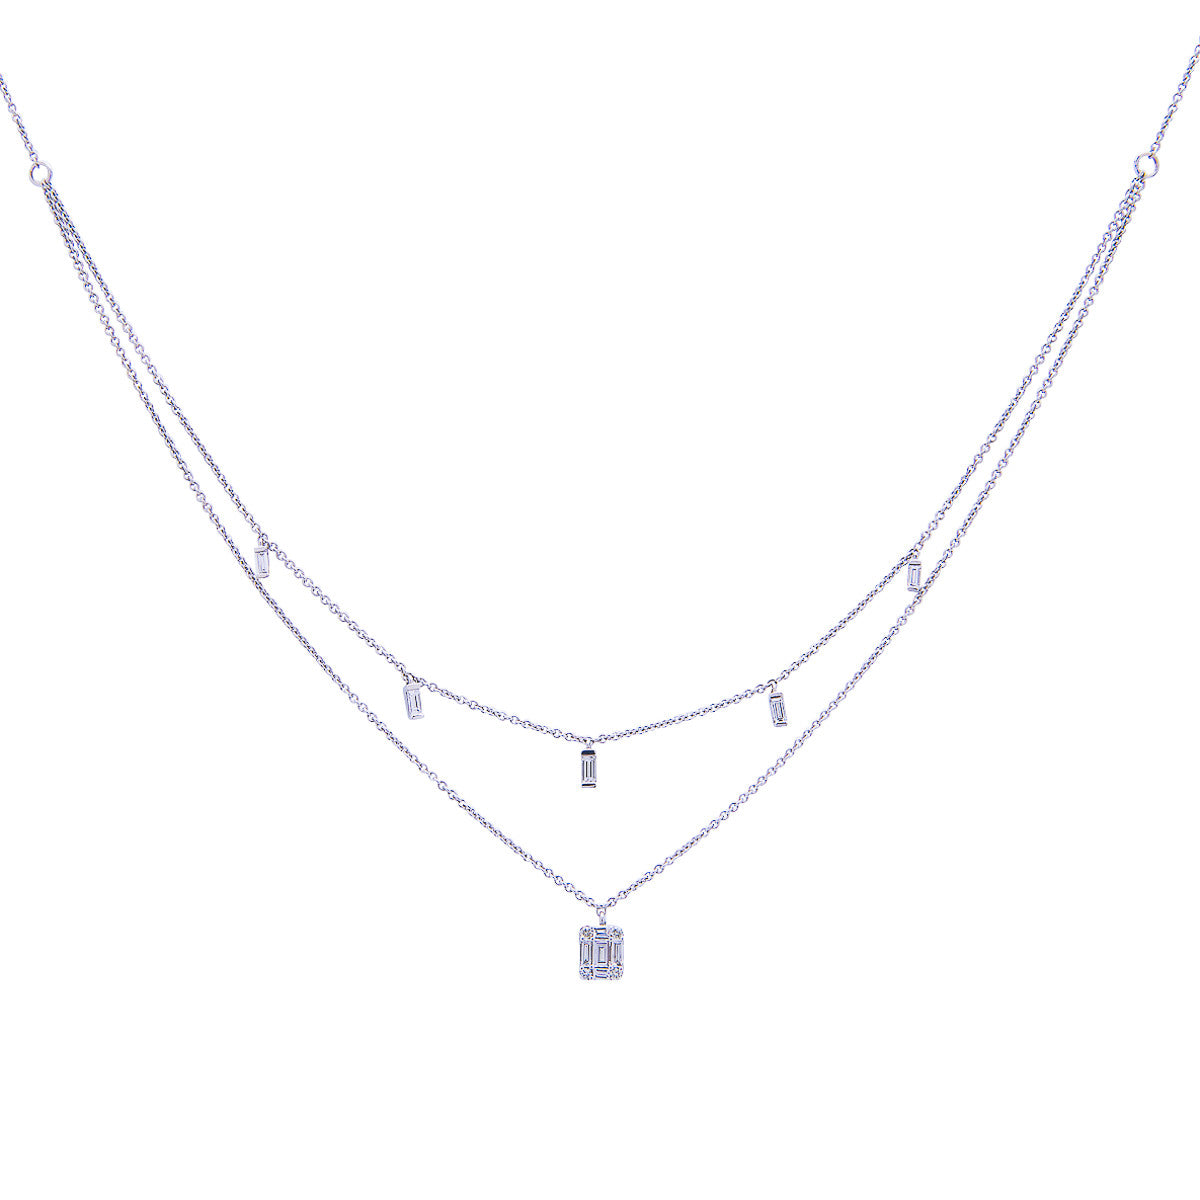 Sabel Collection 14K White Gold Two-Row Diamond Station Necklace